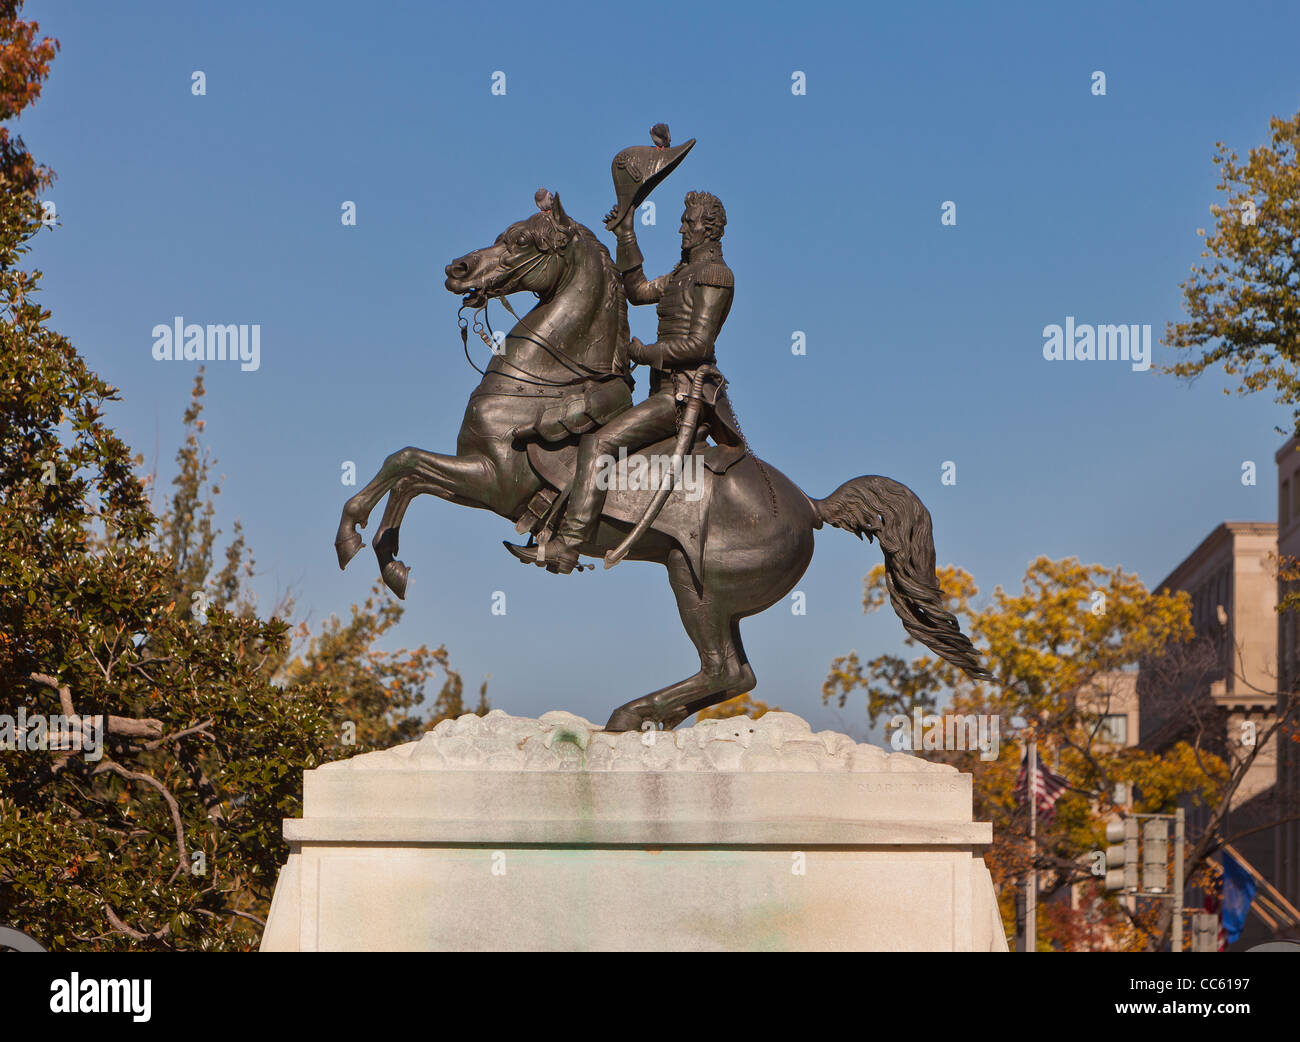 WASHINGTON, DC USA - Statue of President Andrew Jackson in center of Lafayette Park, also known as Lafayette Square. Stock Photo